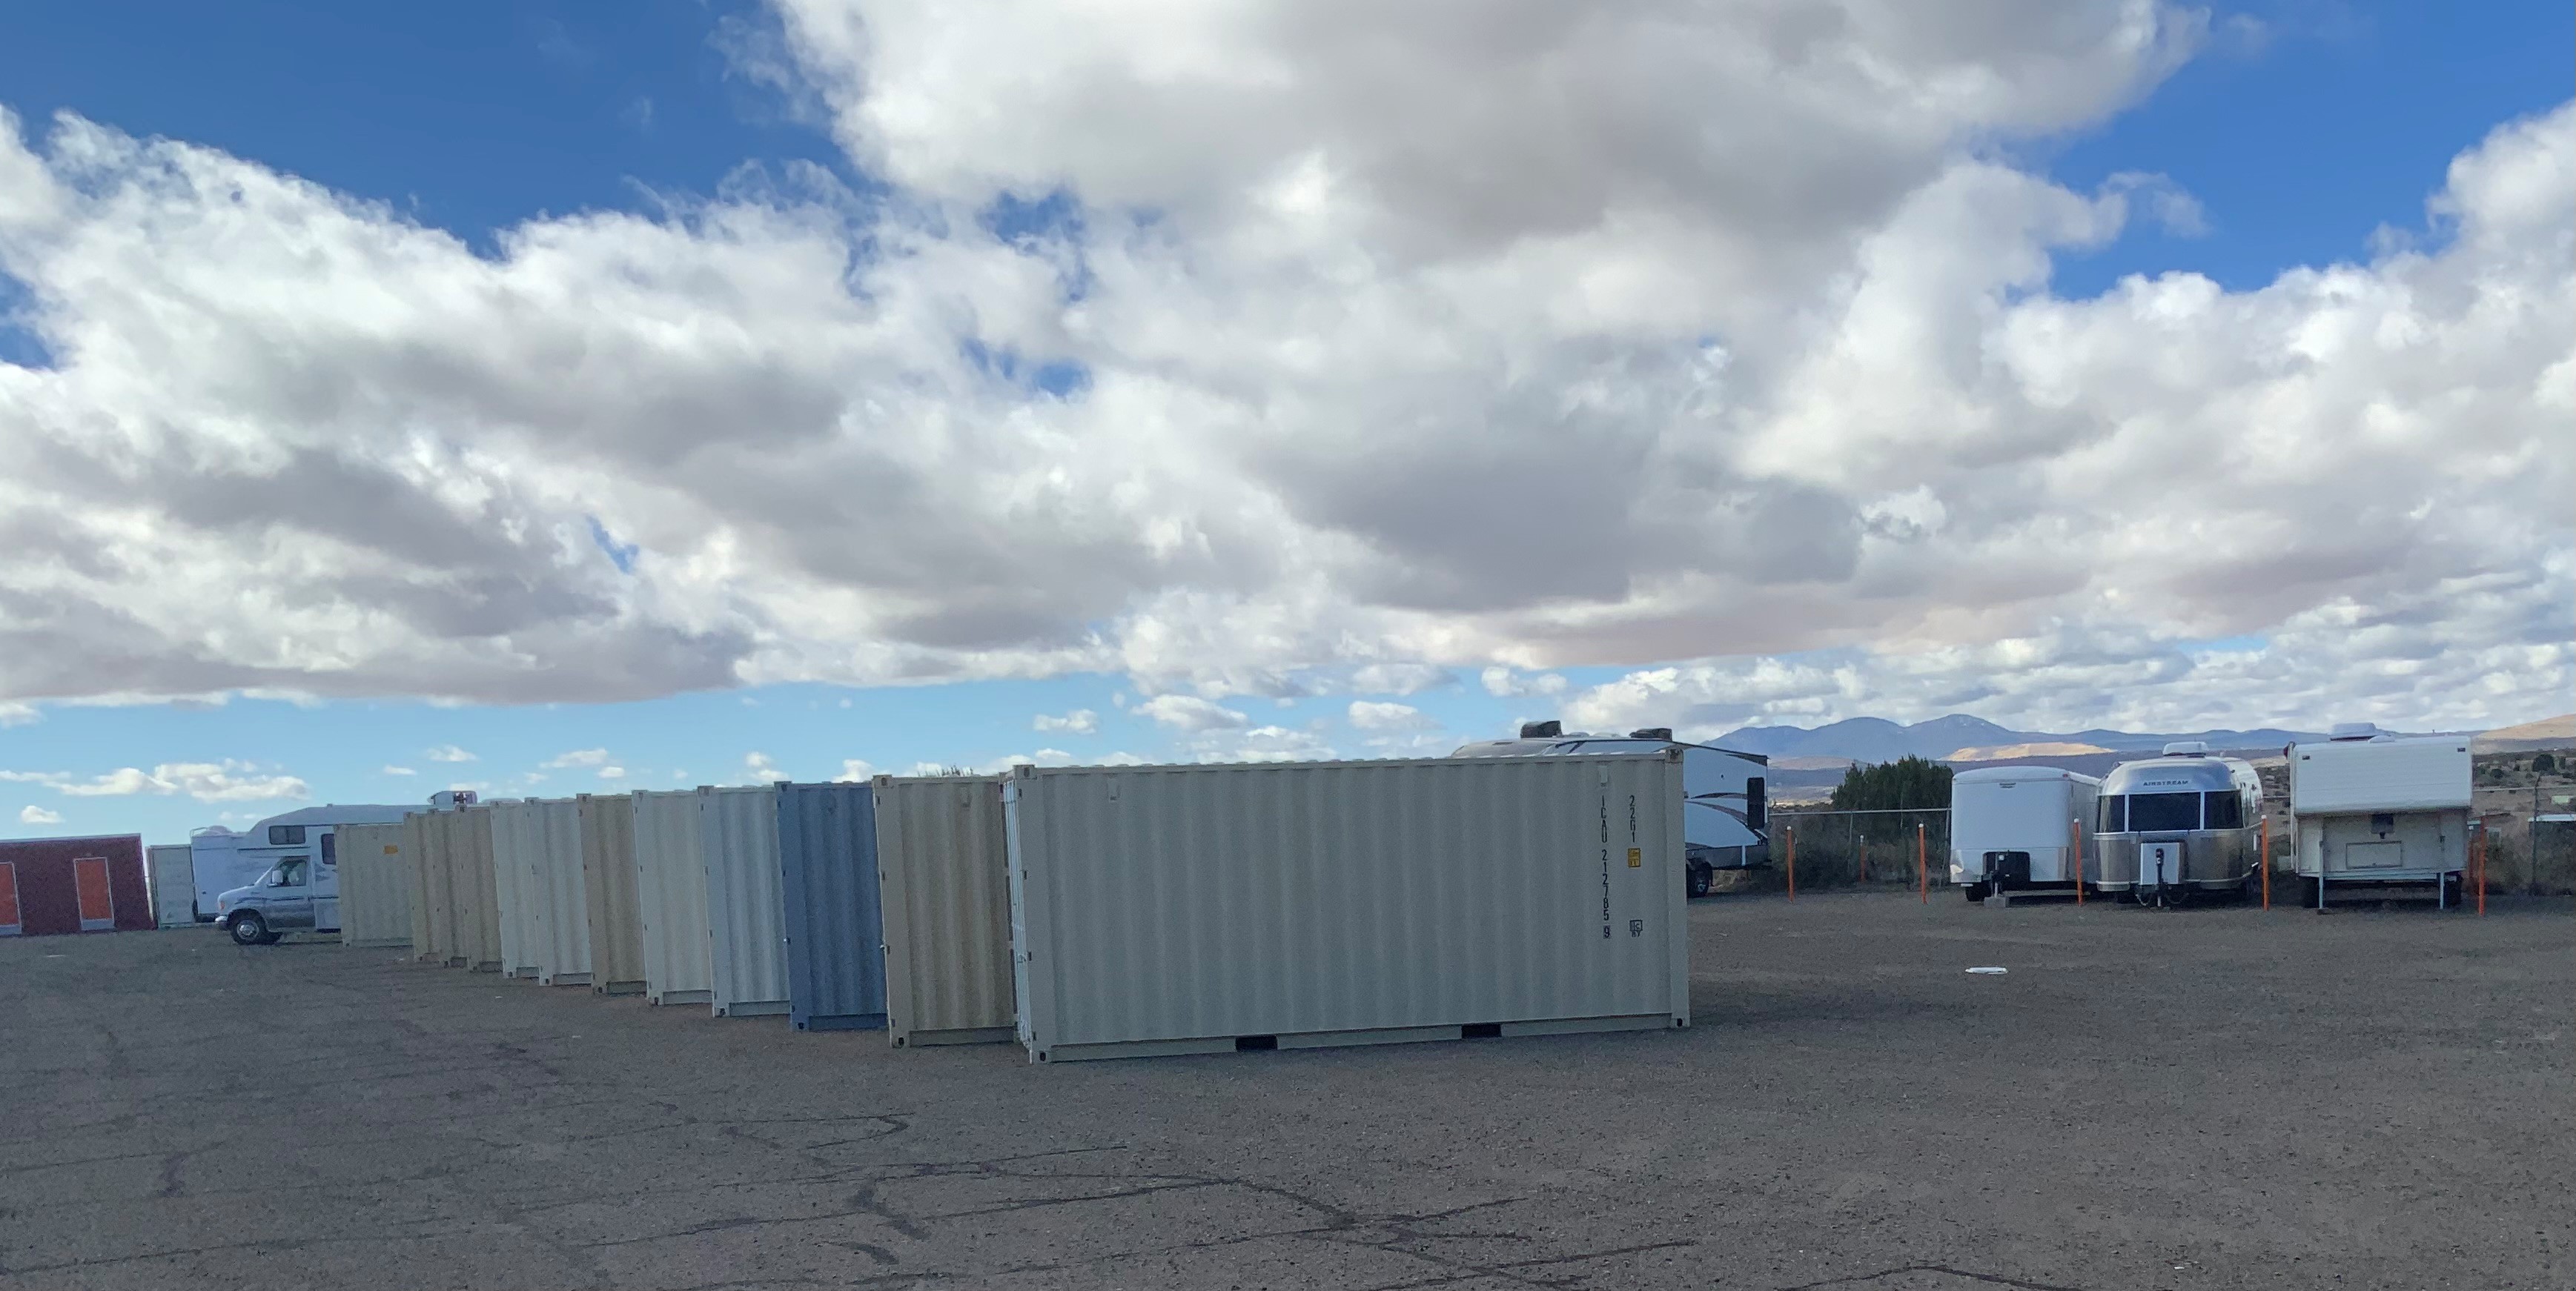 Lock Wise Self Storage - Ridge Road - Drive-Up Accessible Storage & Outdoor Parking in Silver City, NM